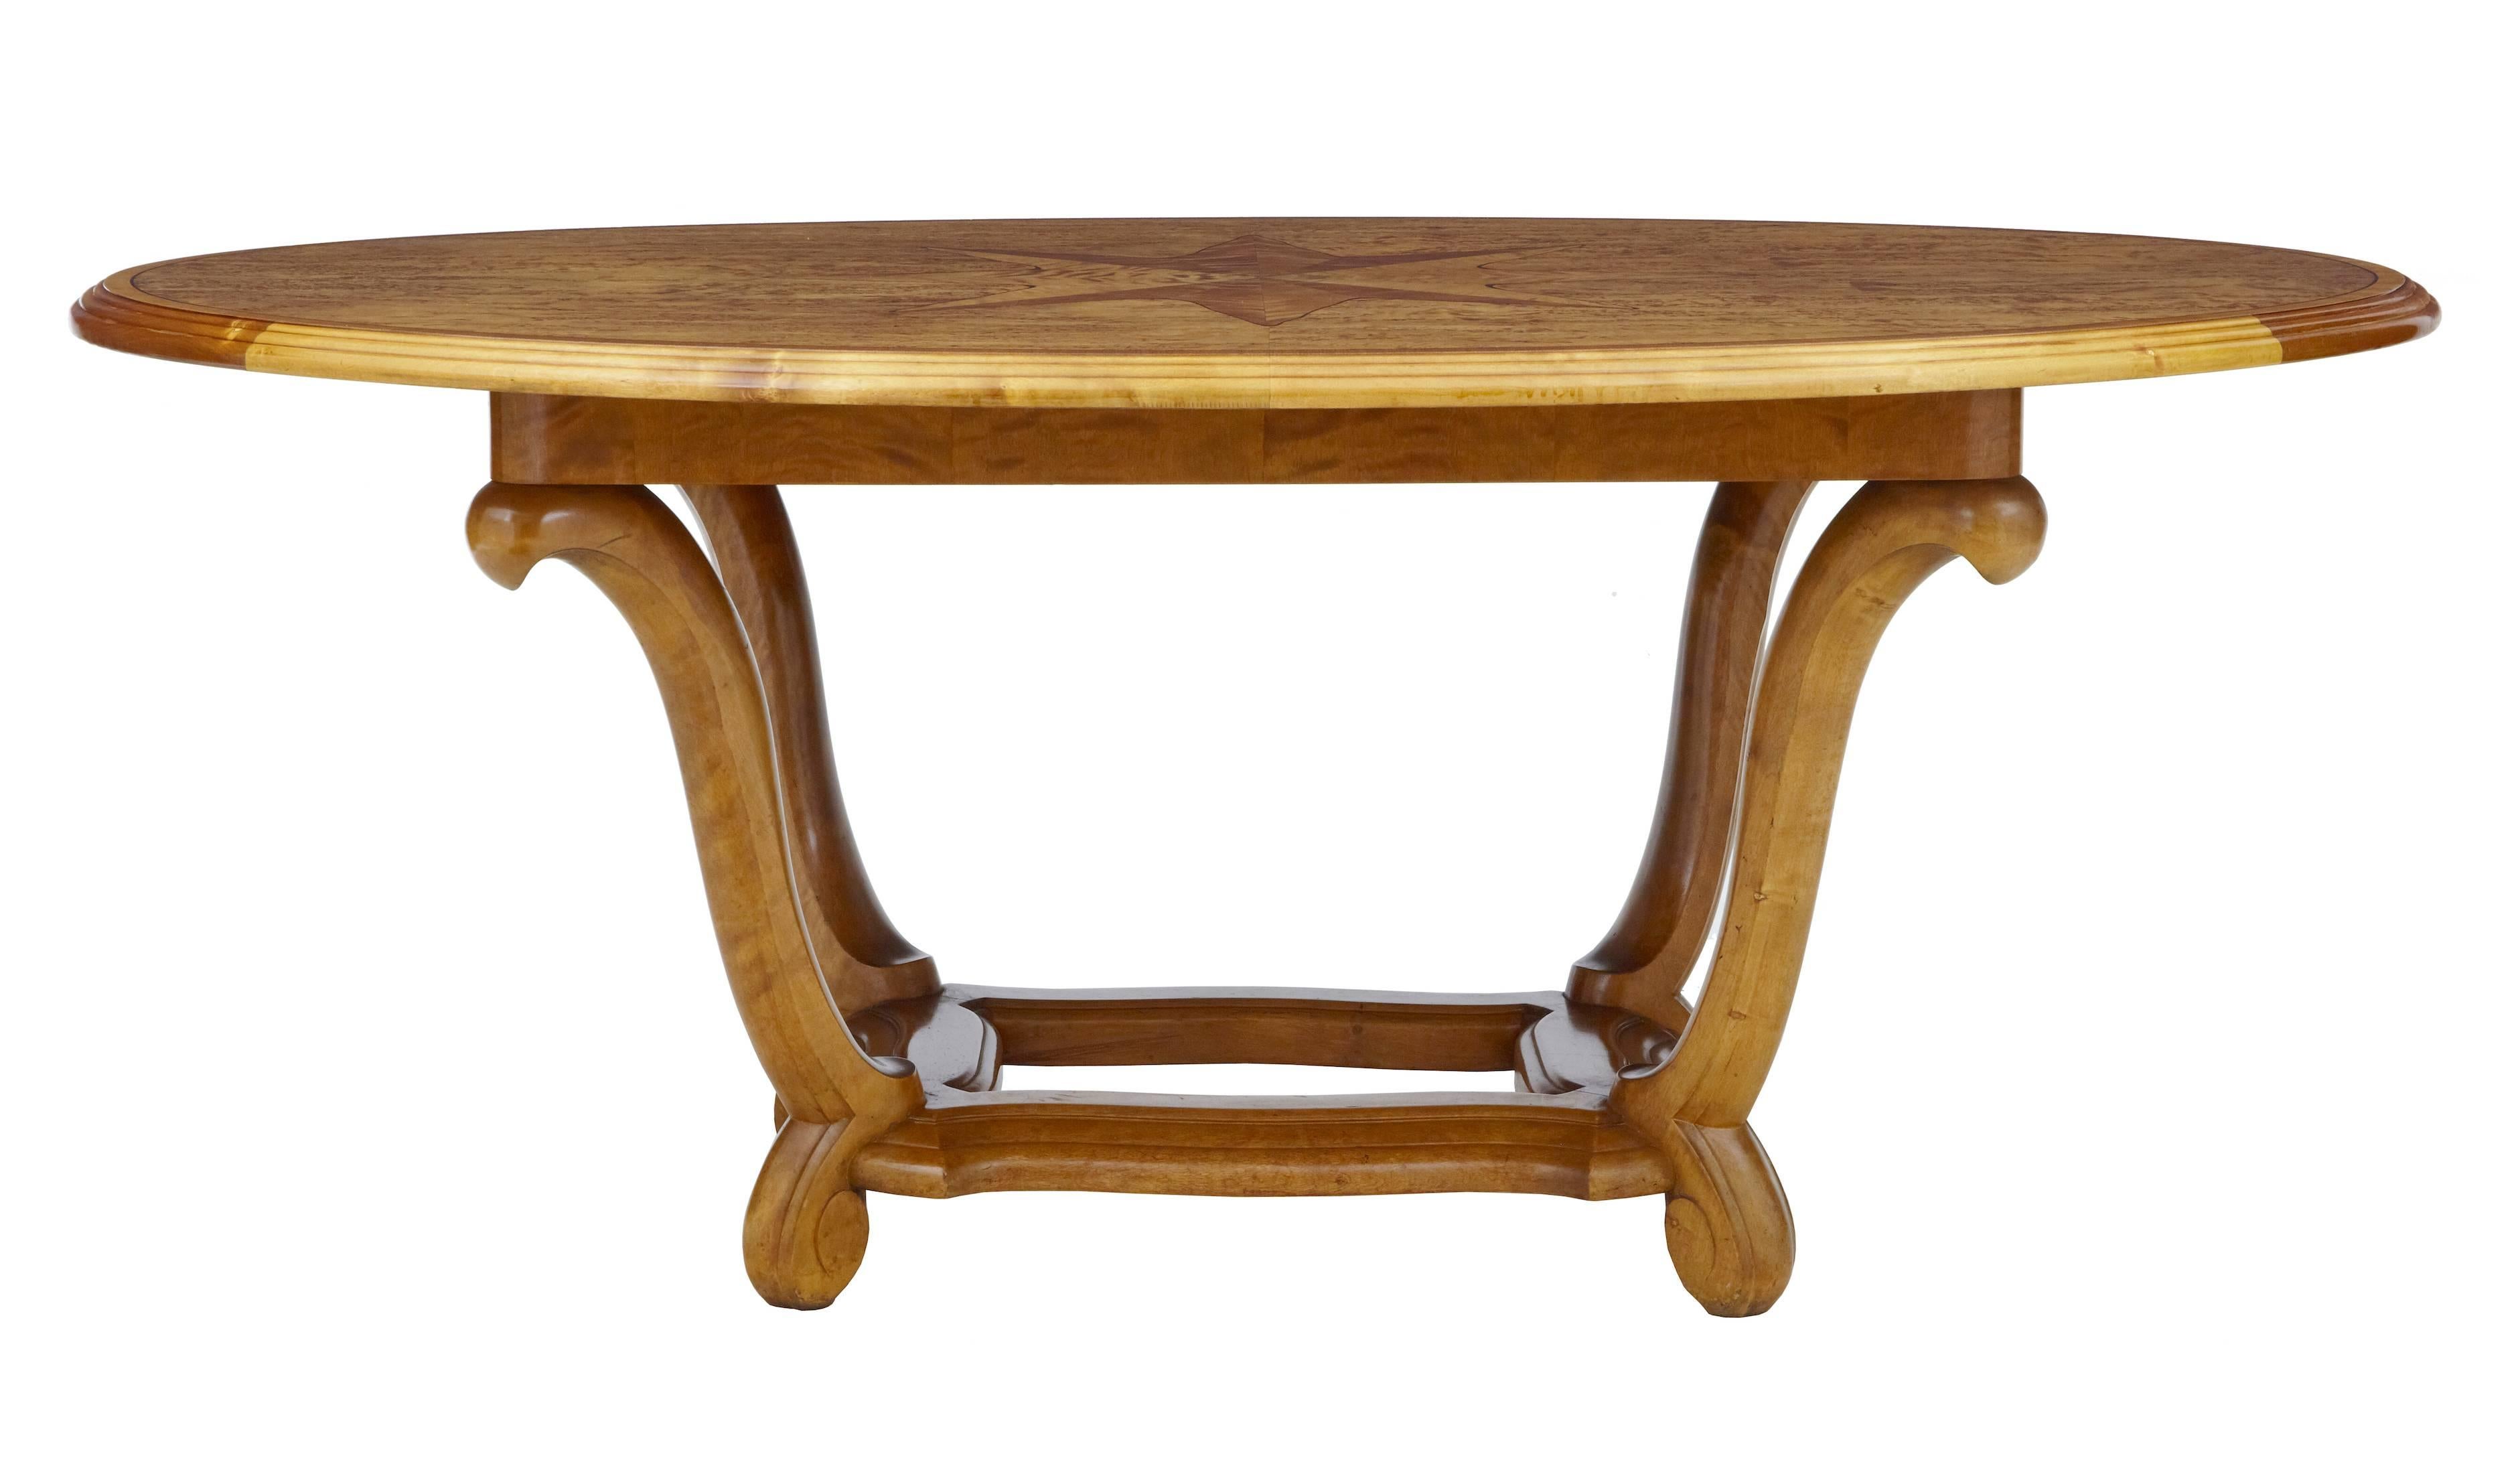 Stunning pure Art Deco period center table, circa 1920.
Oval shape which has been veneered with striking alder root.
Channeled edging.
Standing on four legs and united by stretcher of flowing form.
Stunning table.
Measures:
Height: